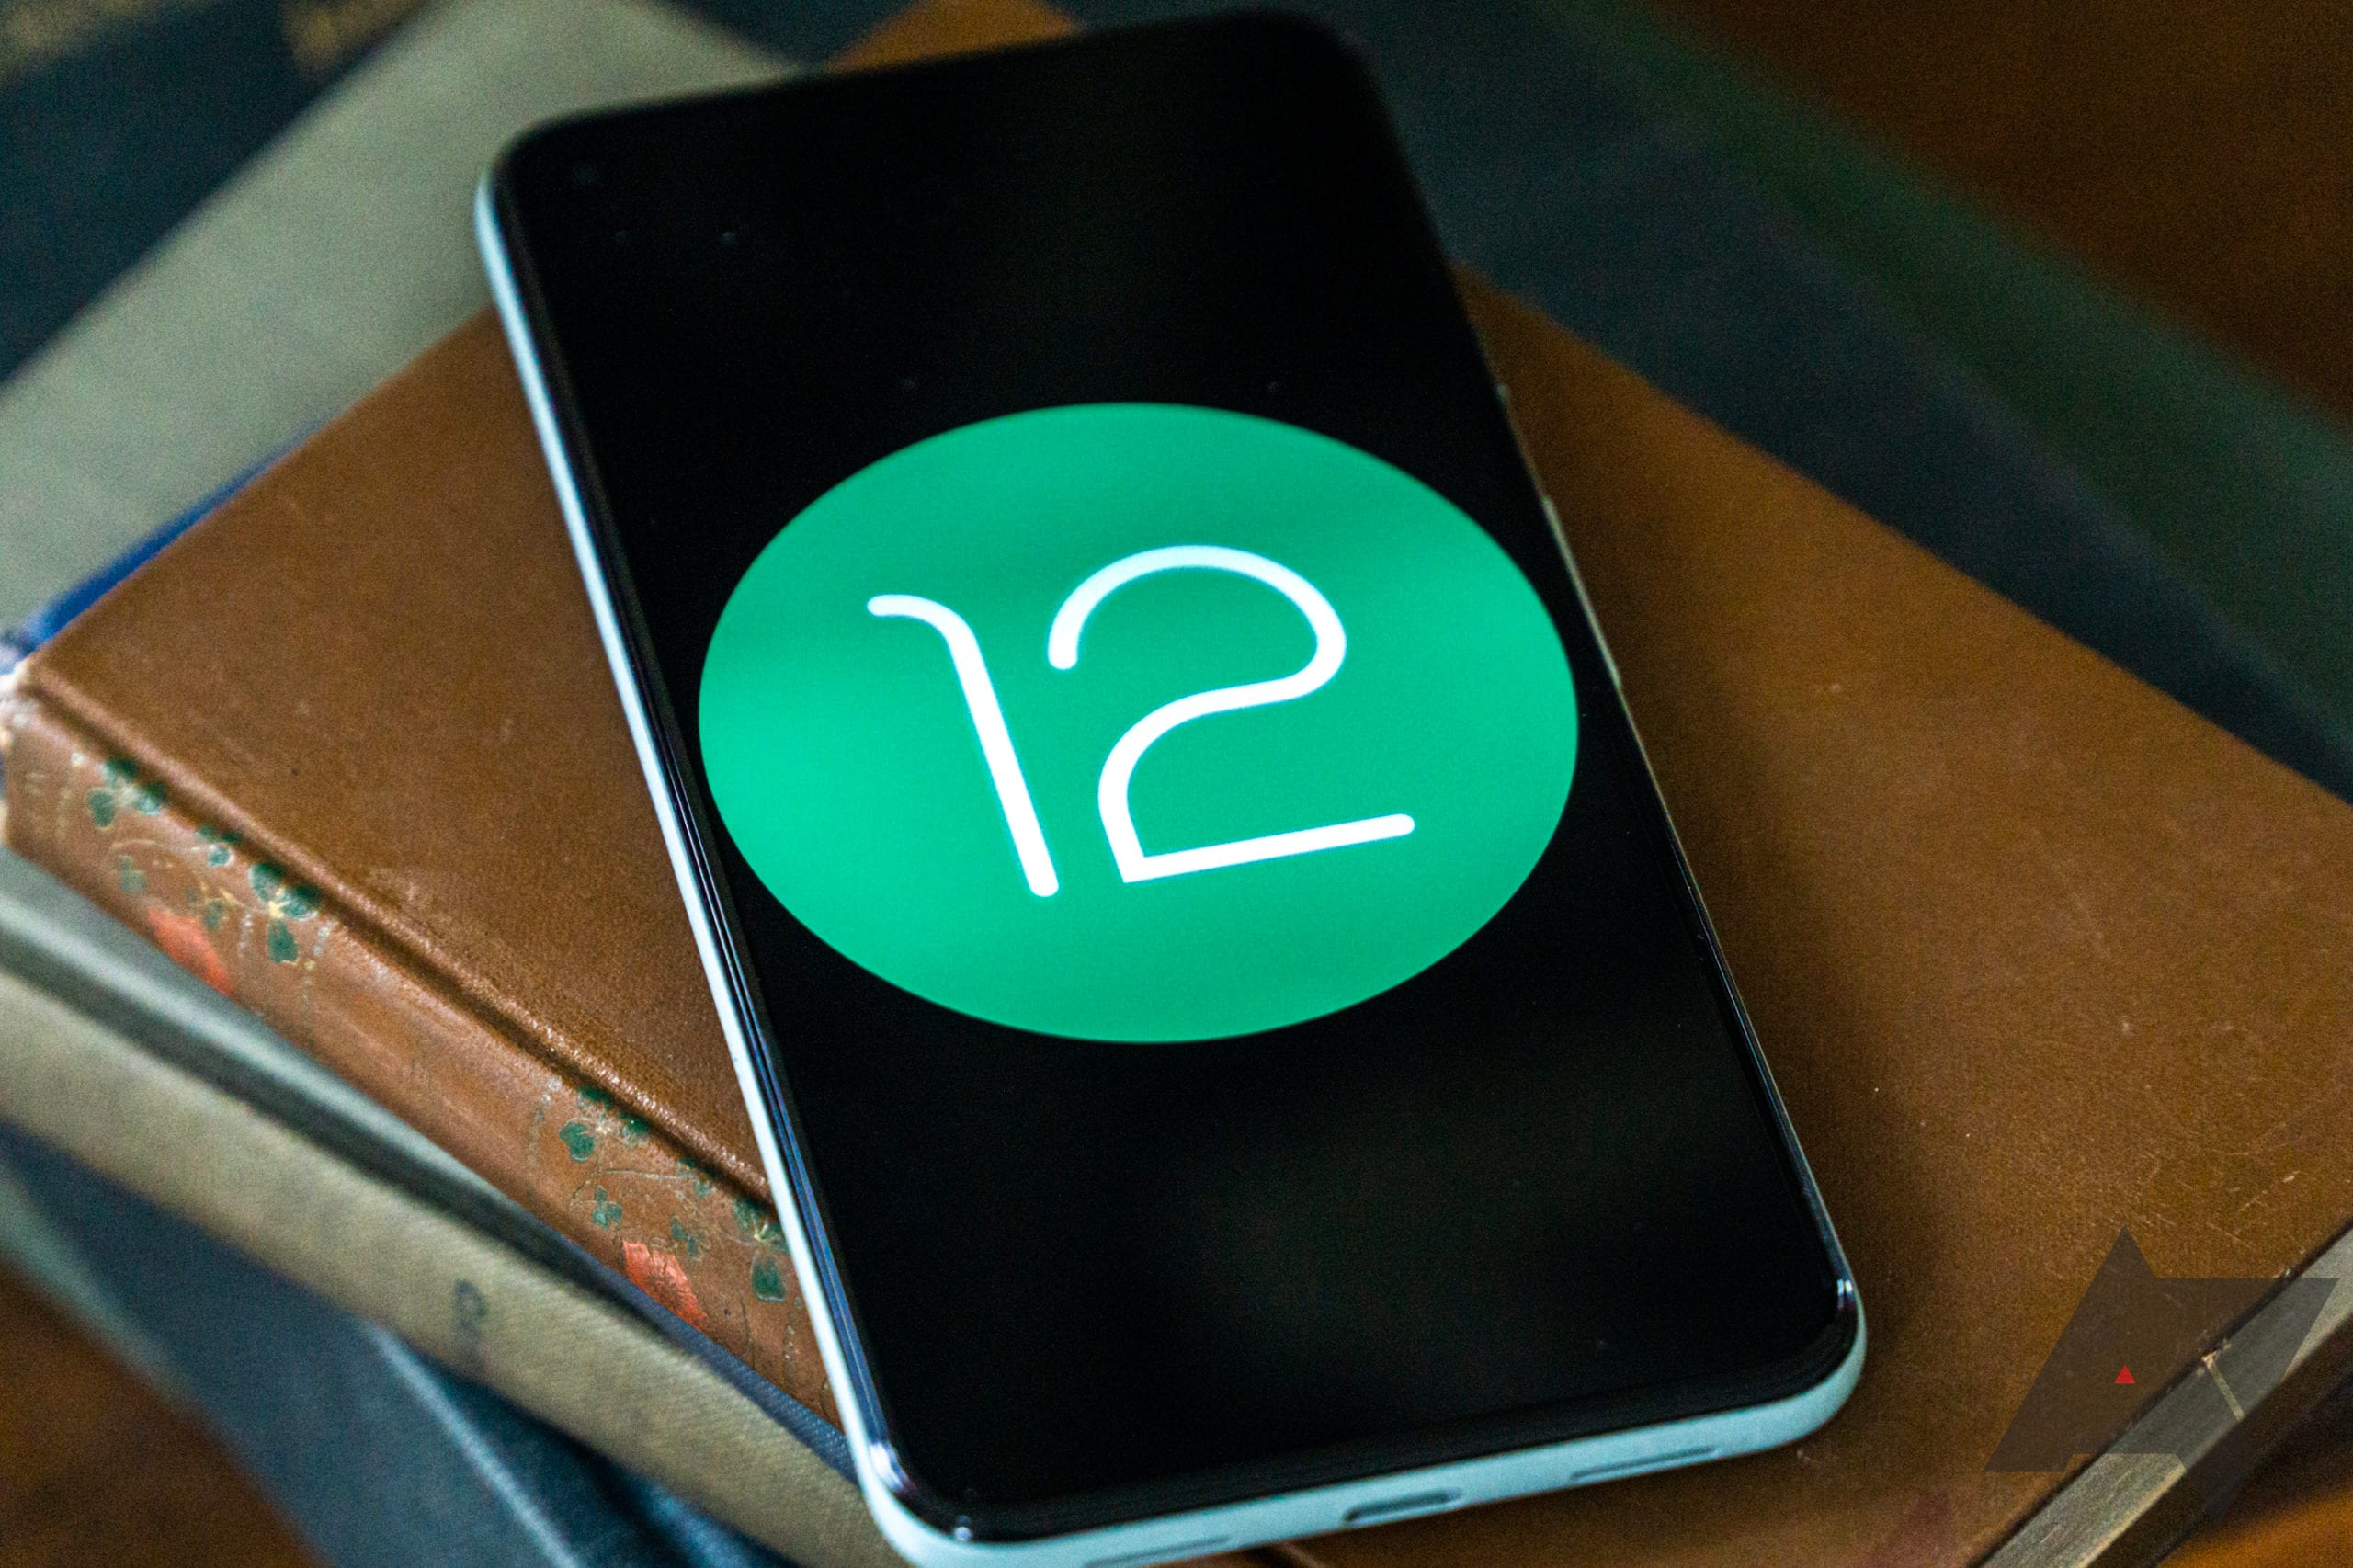 Beta 4 of Android 12 is coming: the operating system is increasingly stable and close to release